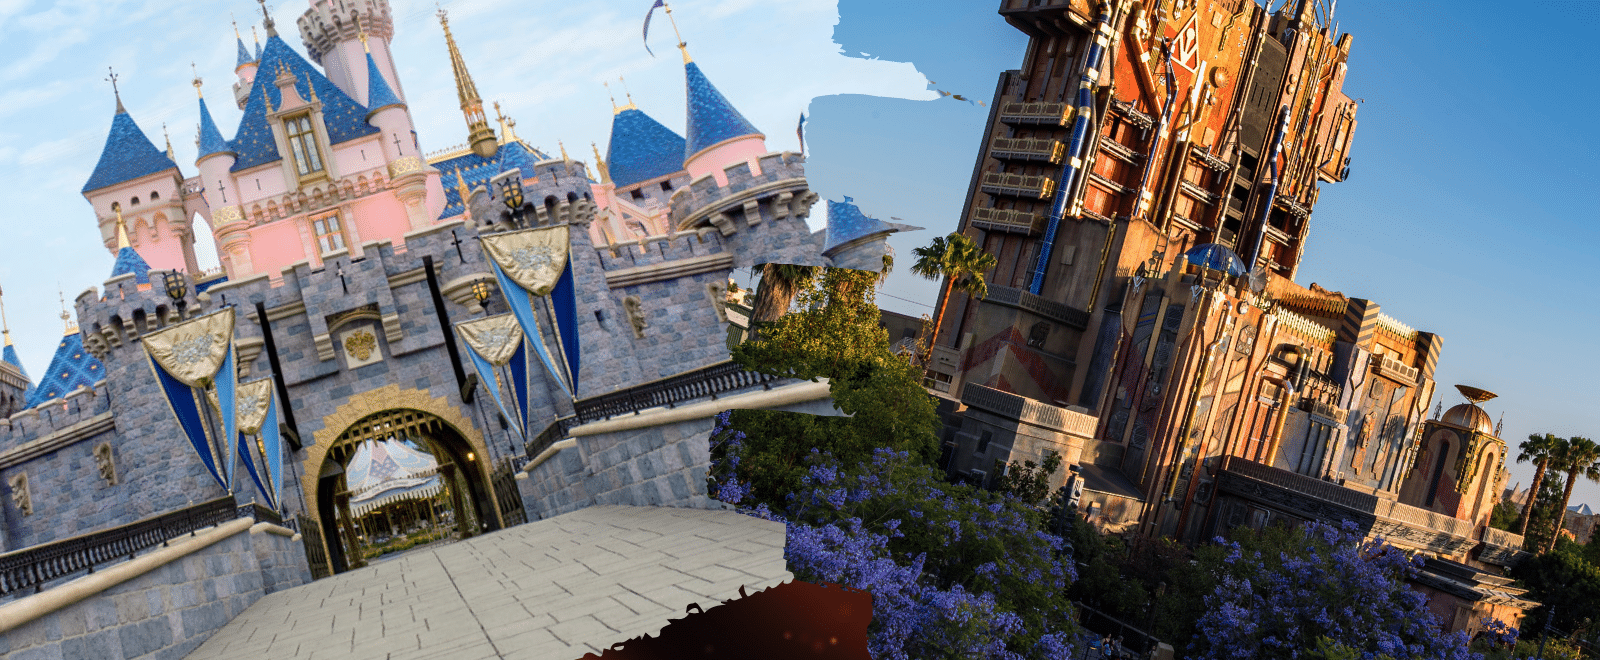 Disneyland vs California Adventure: Sparkles frame the background of two competing pictures that compose the iconic landscape of the Disneyland California Resort: the Sleeping Beauty Castle in Disneyland vs California Adventure's Guardians of the Galaxy Tower.